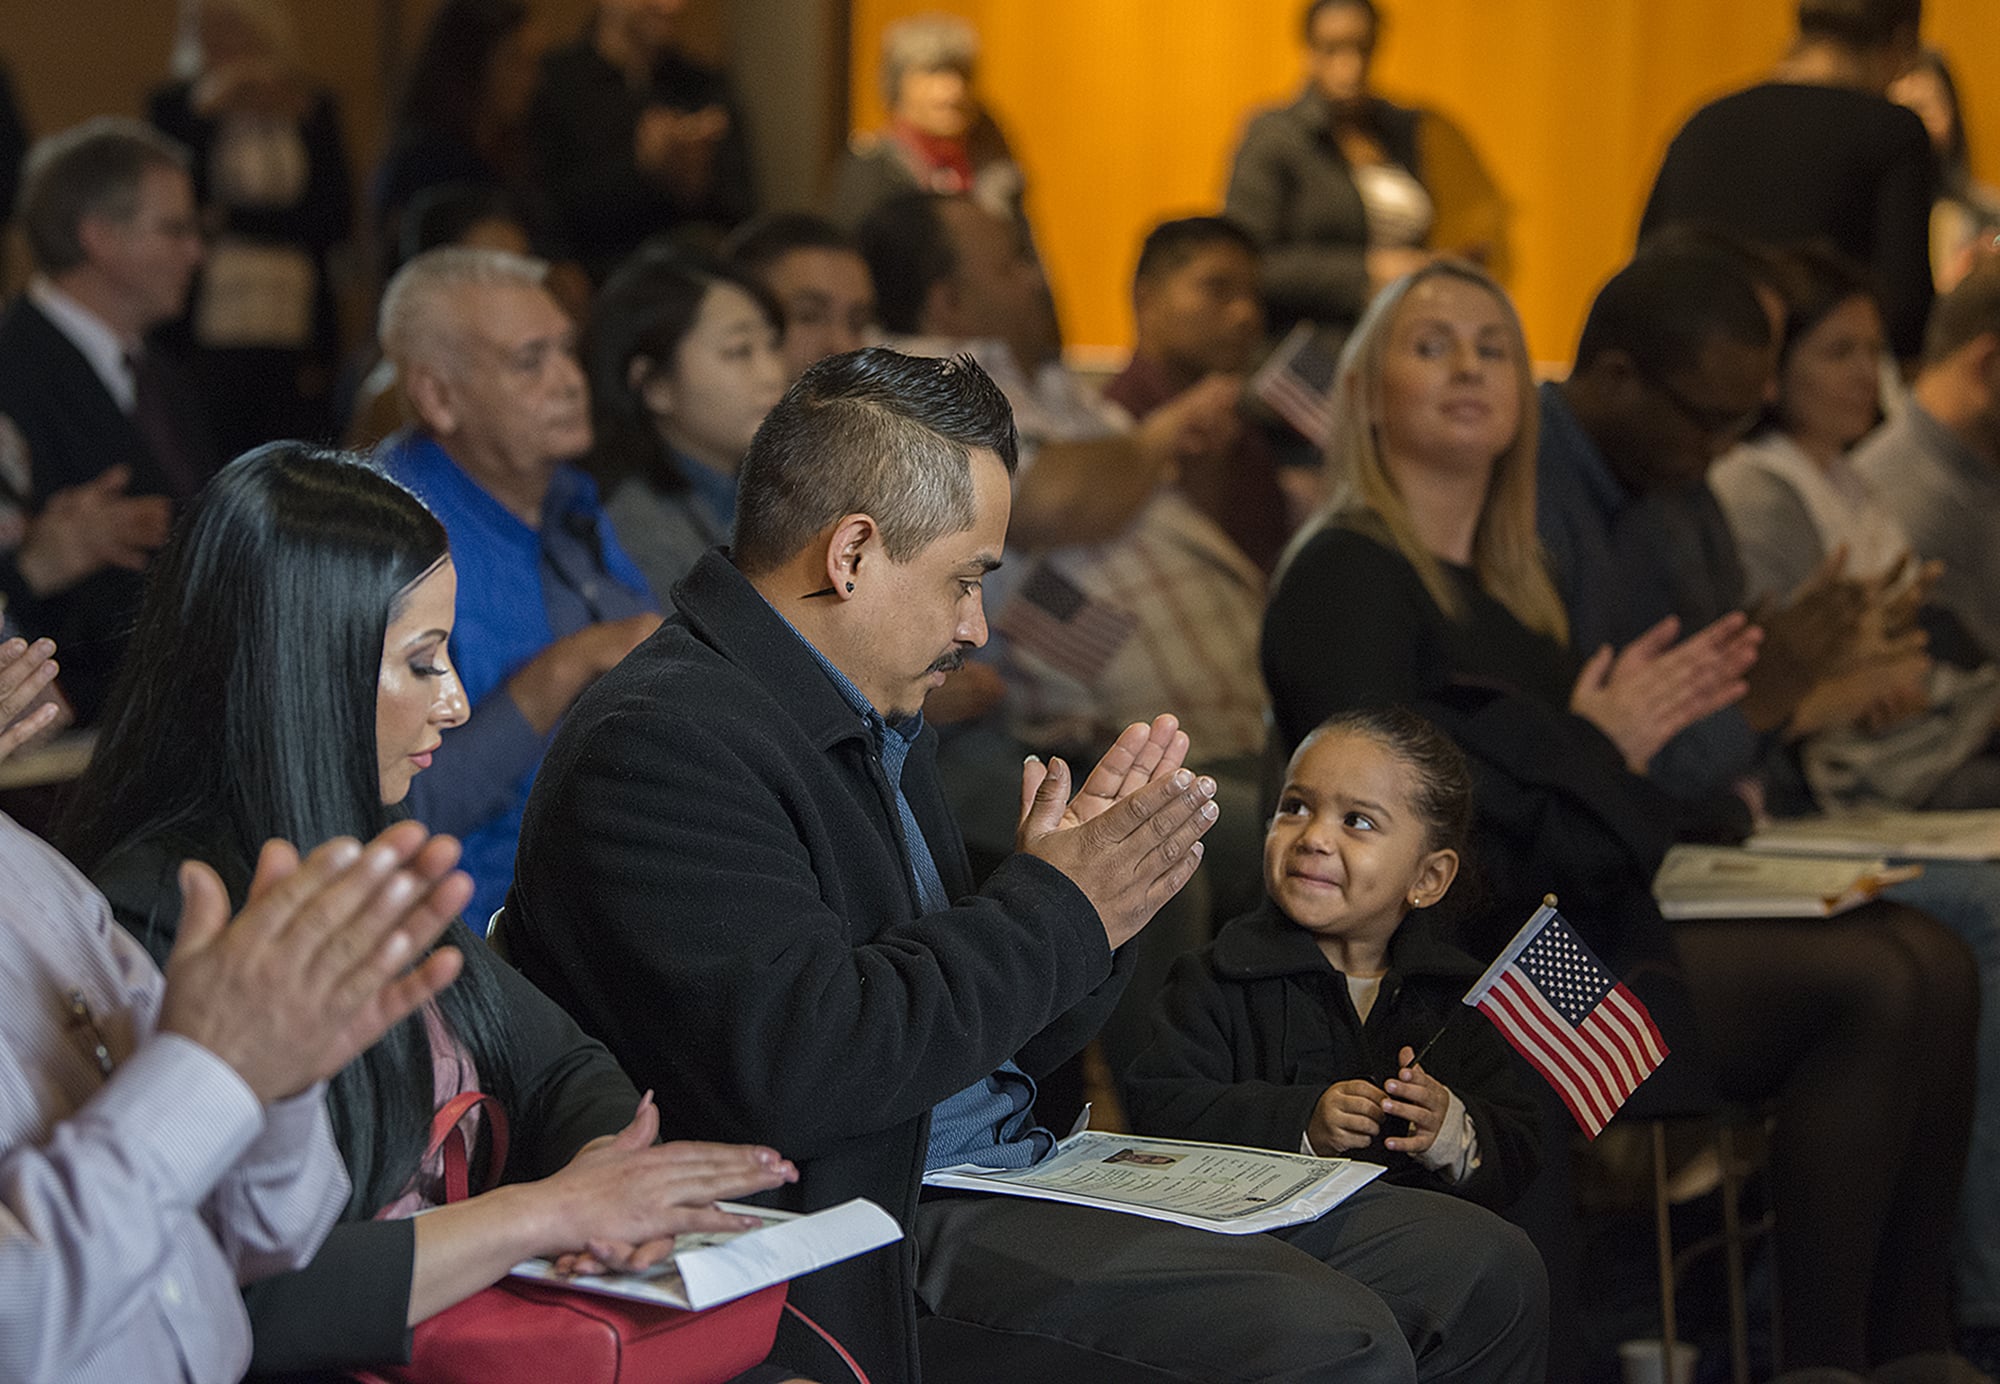 Gallery: Naturalization Ceremony